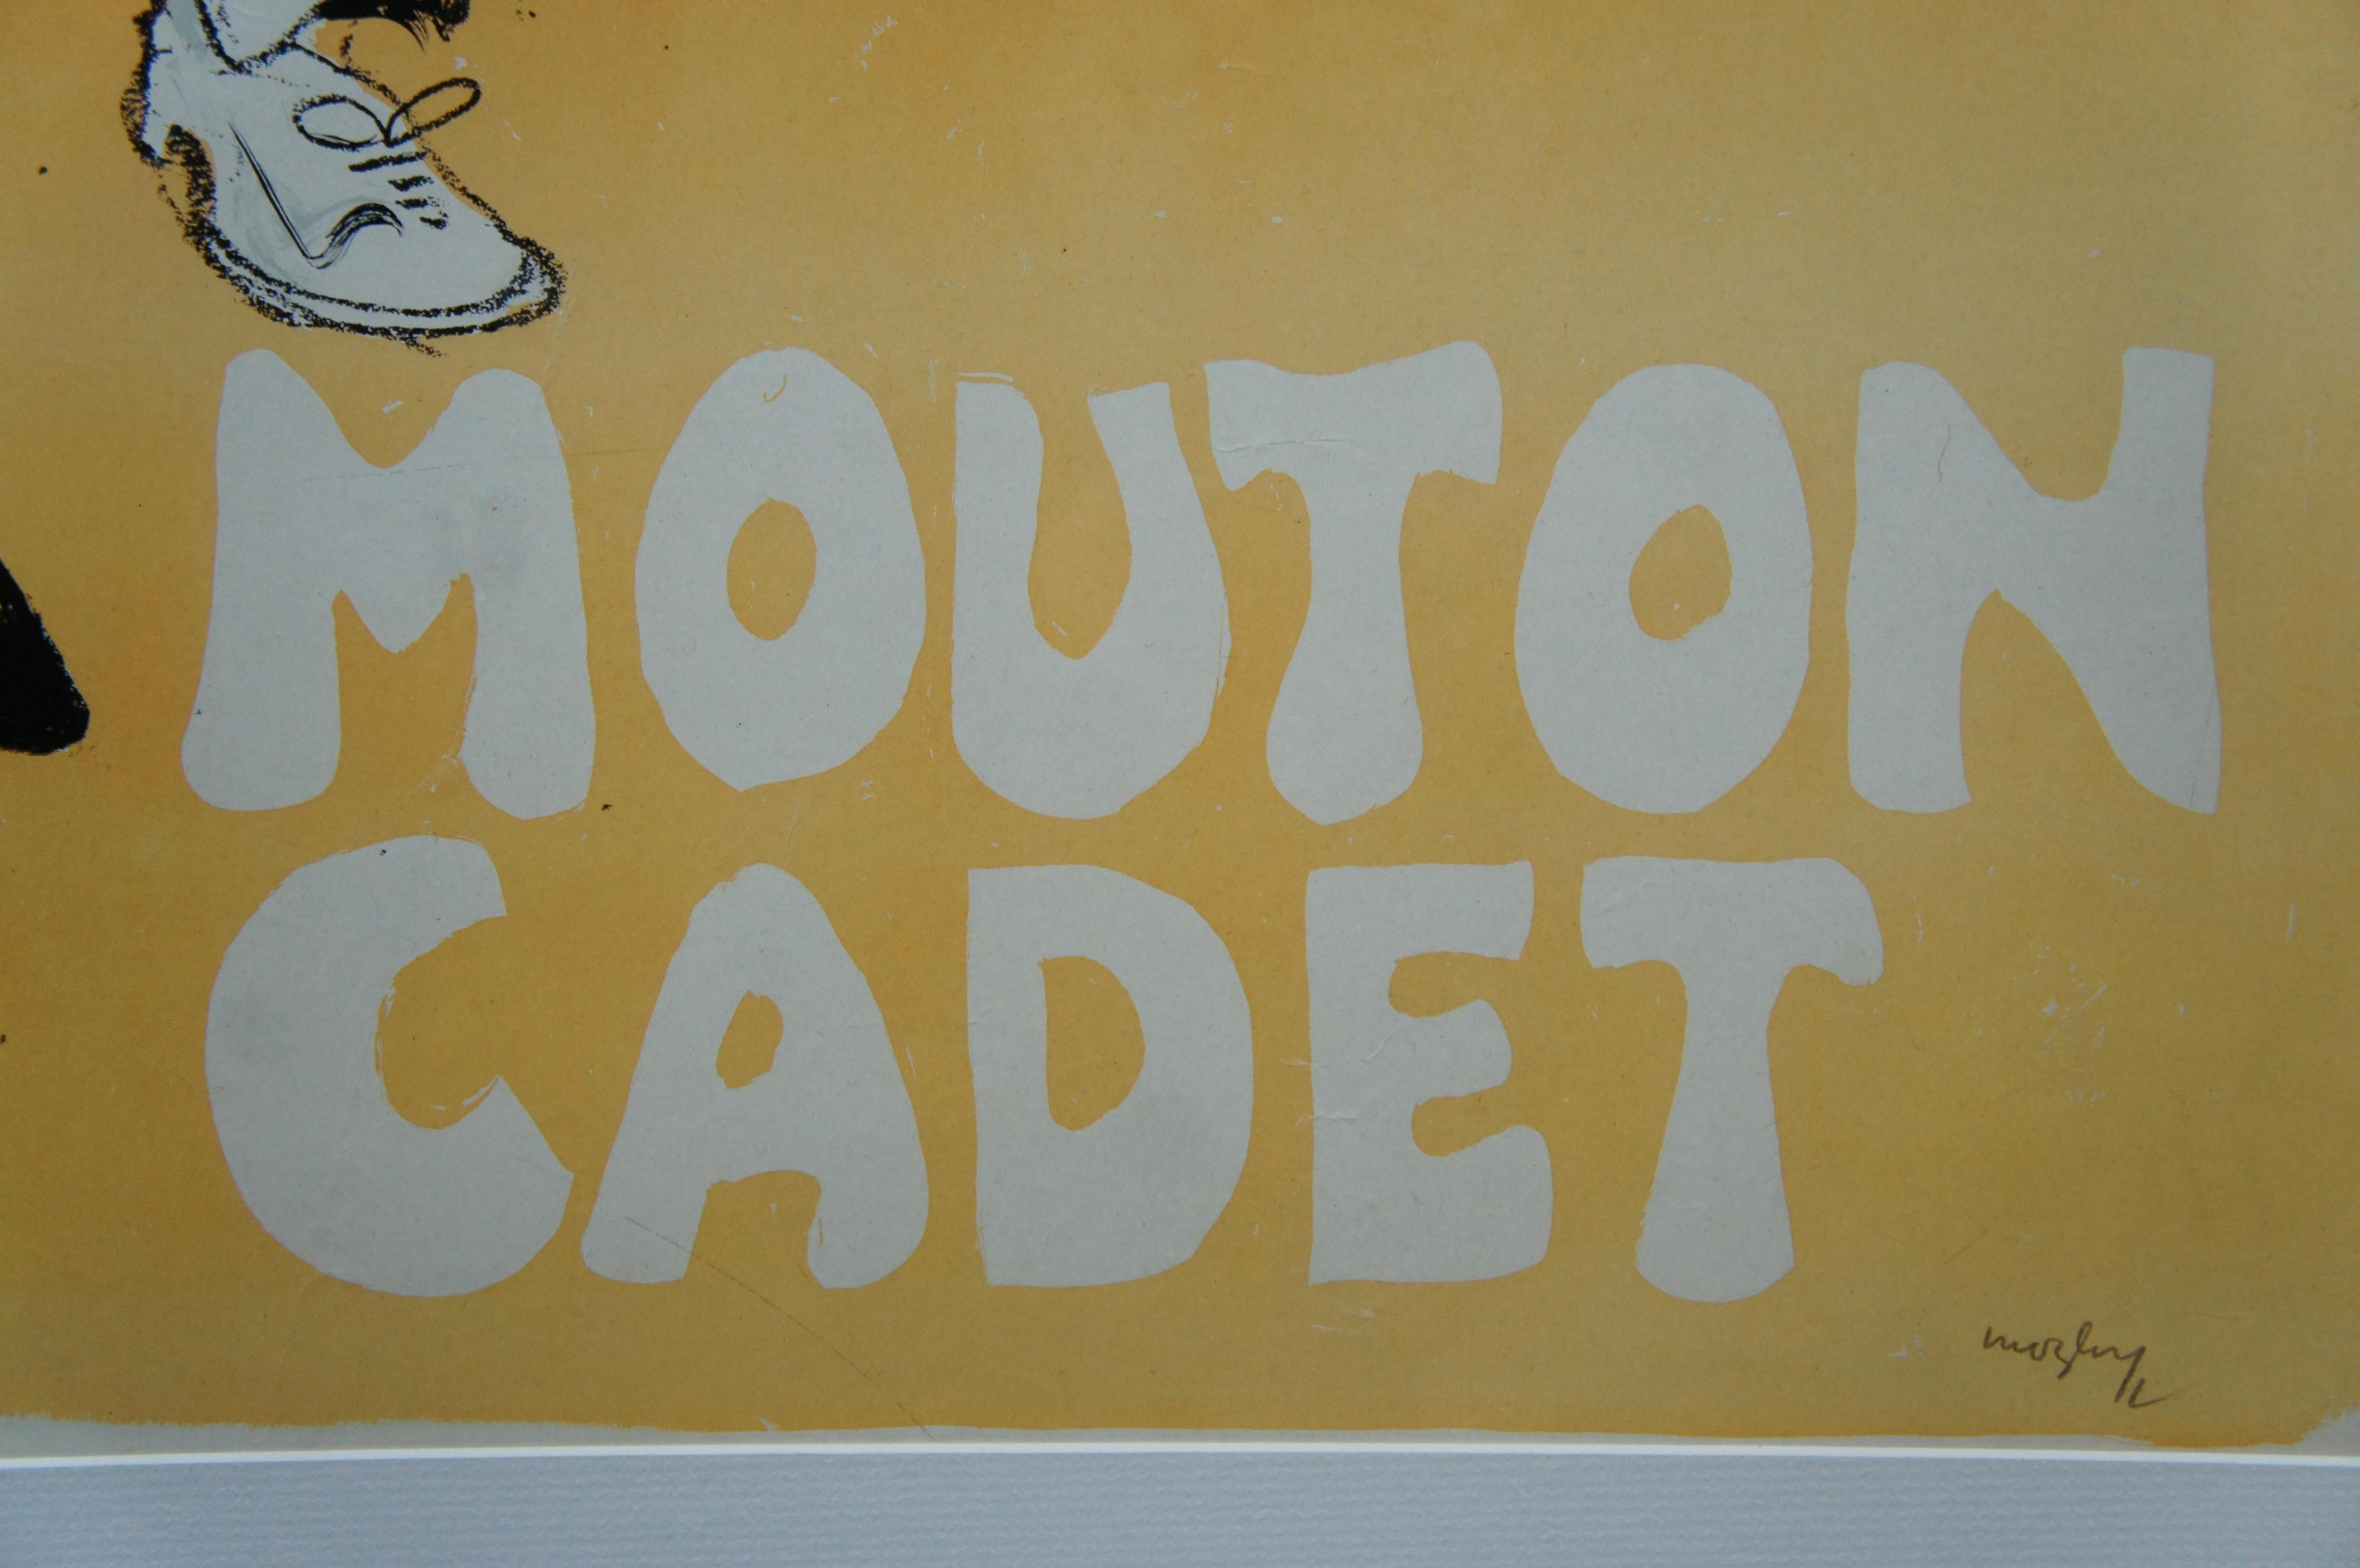 Mid Century Charles Mozley Mouton Cadet Wine Advertisement Poster 40